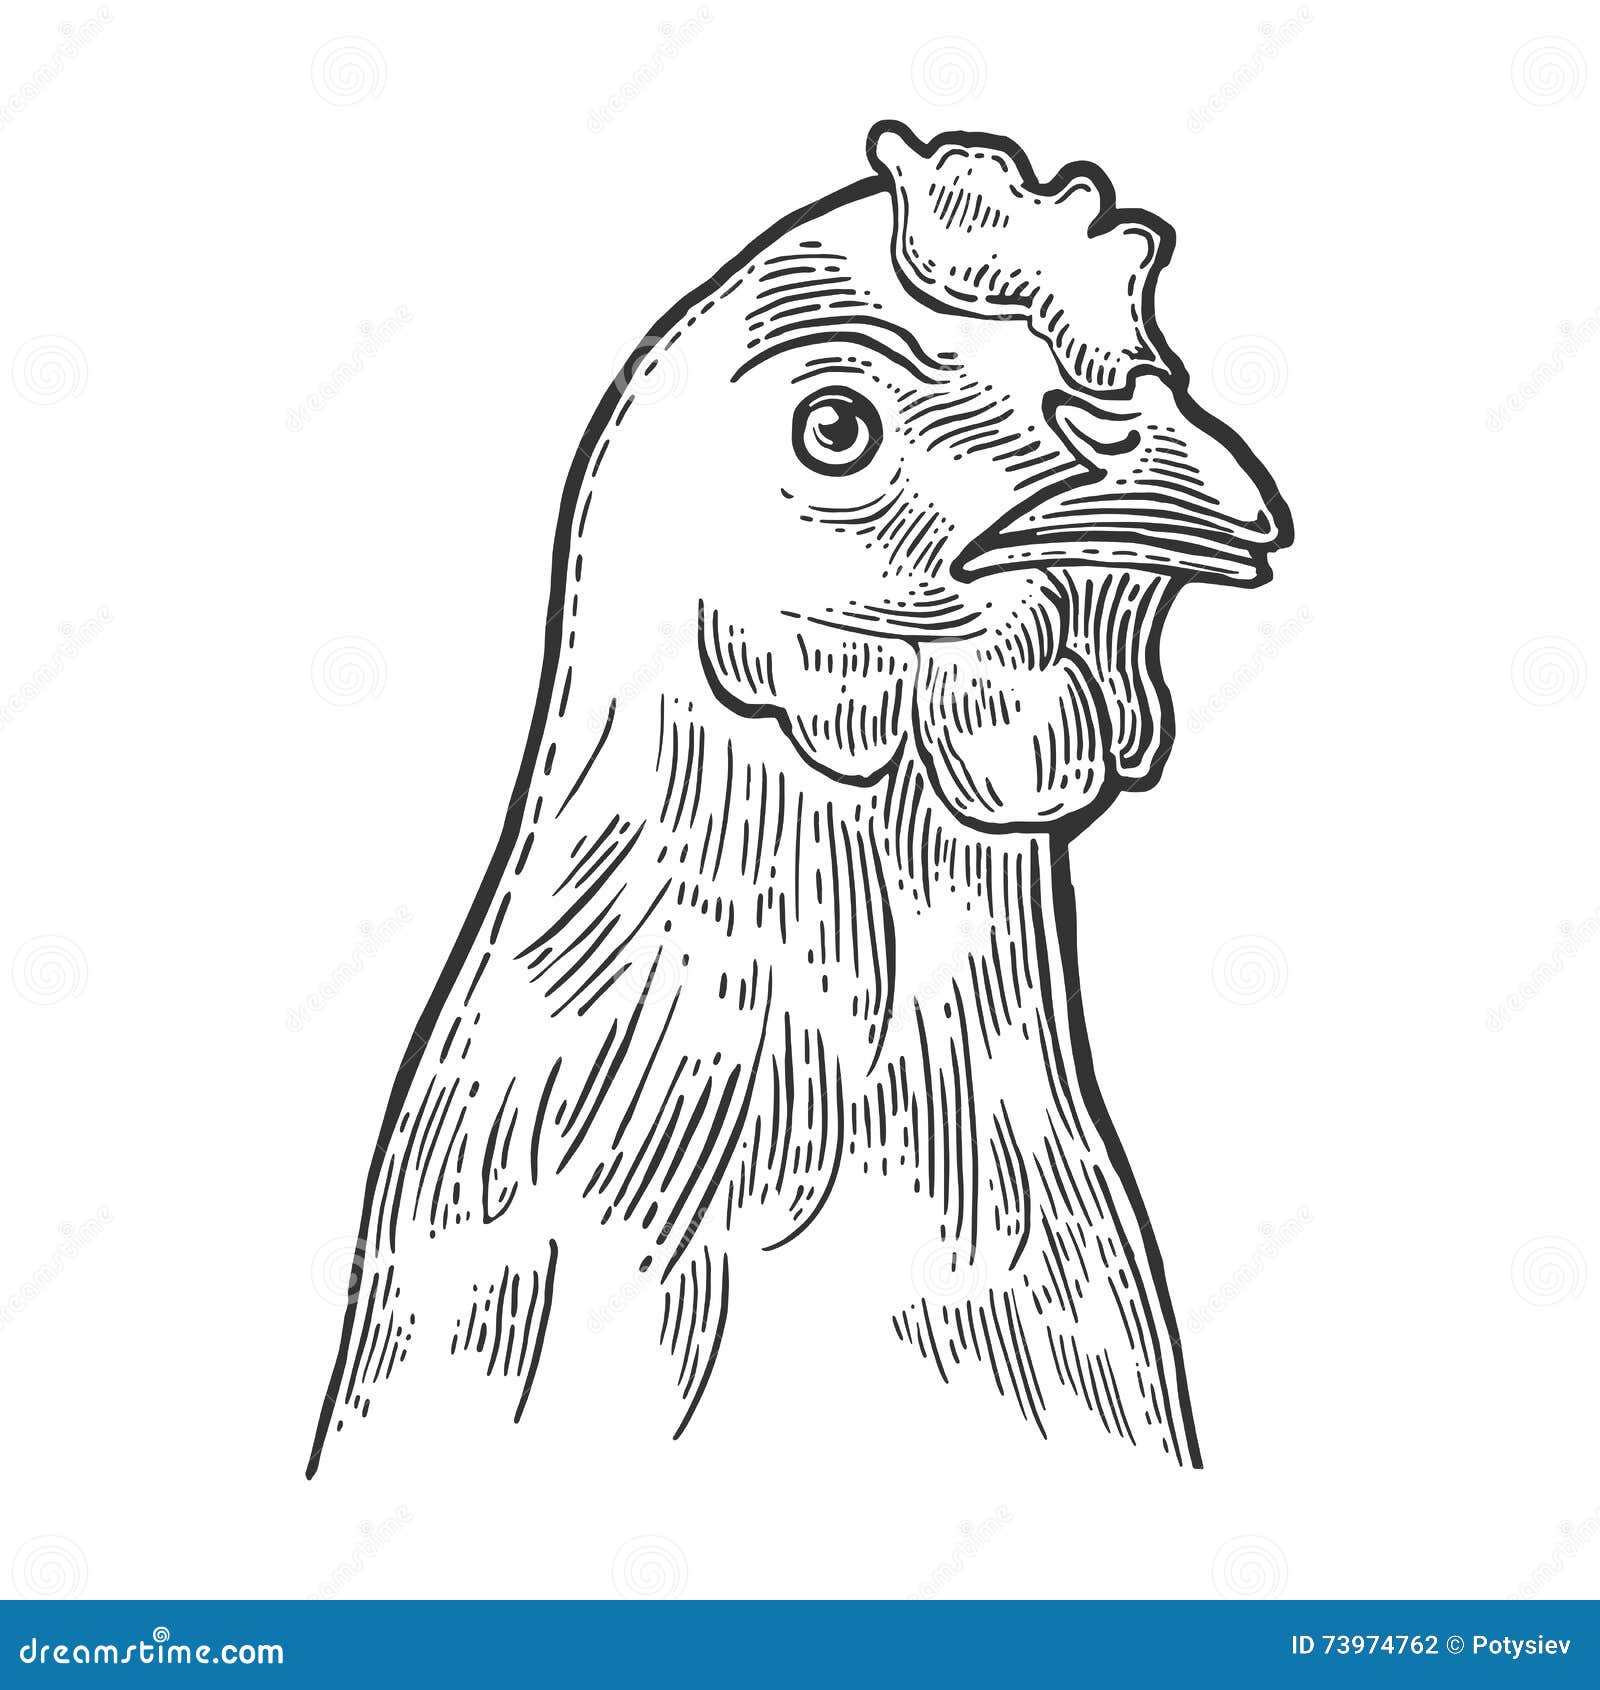 How to Draw a Chicken Hen